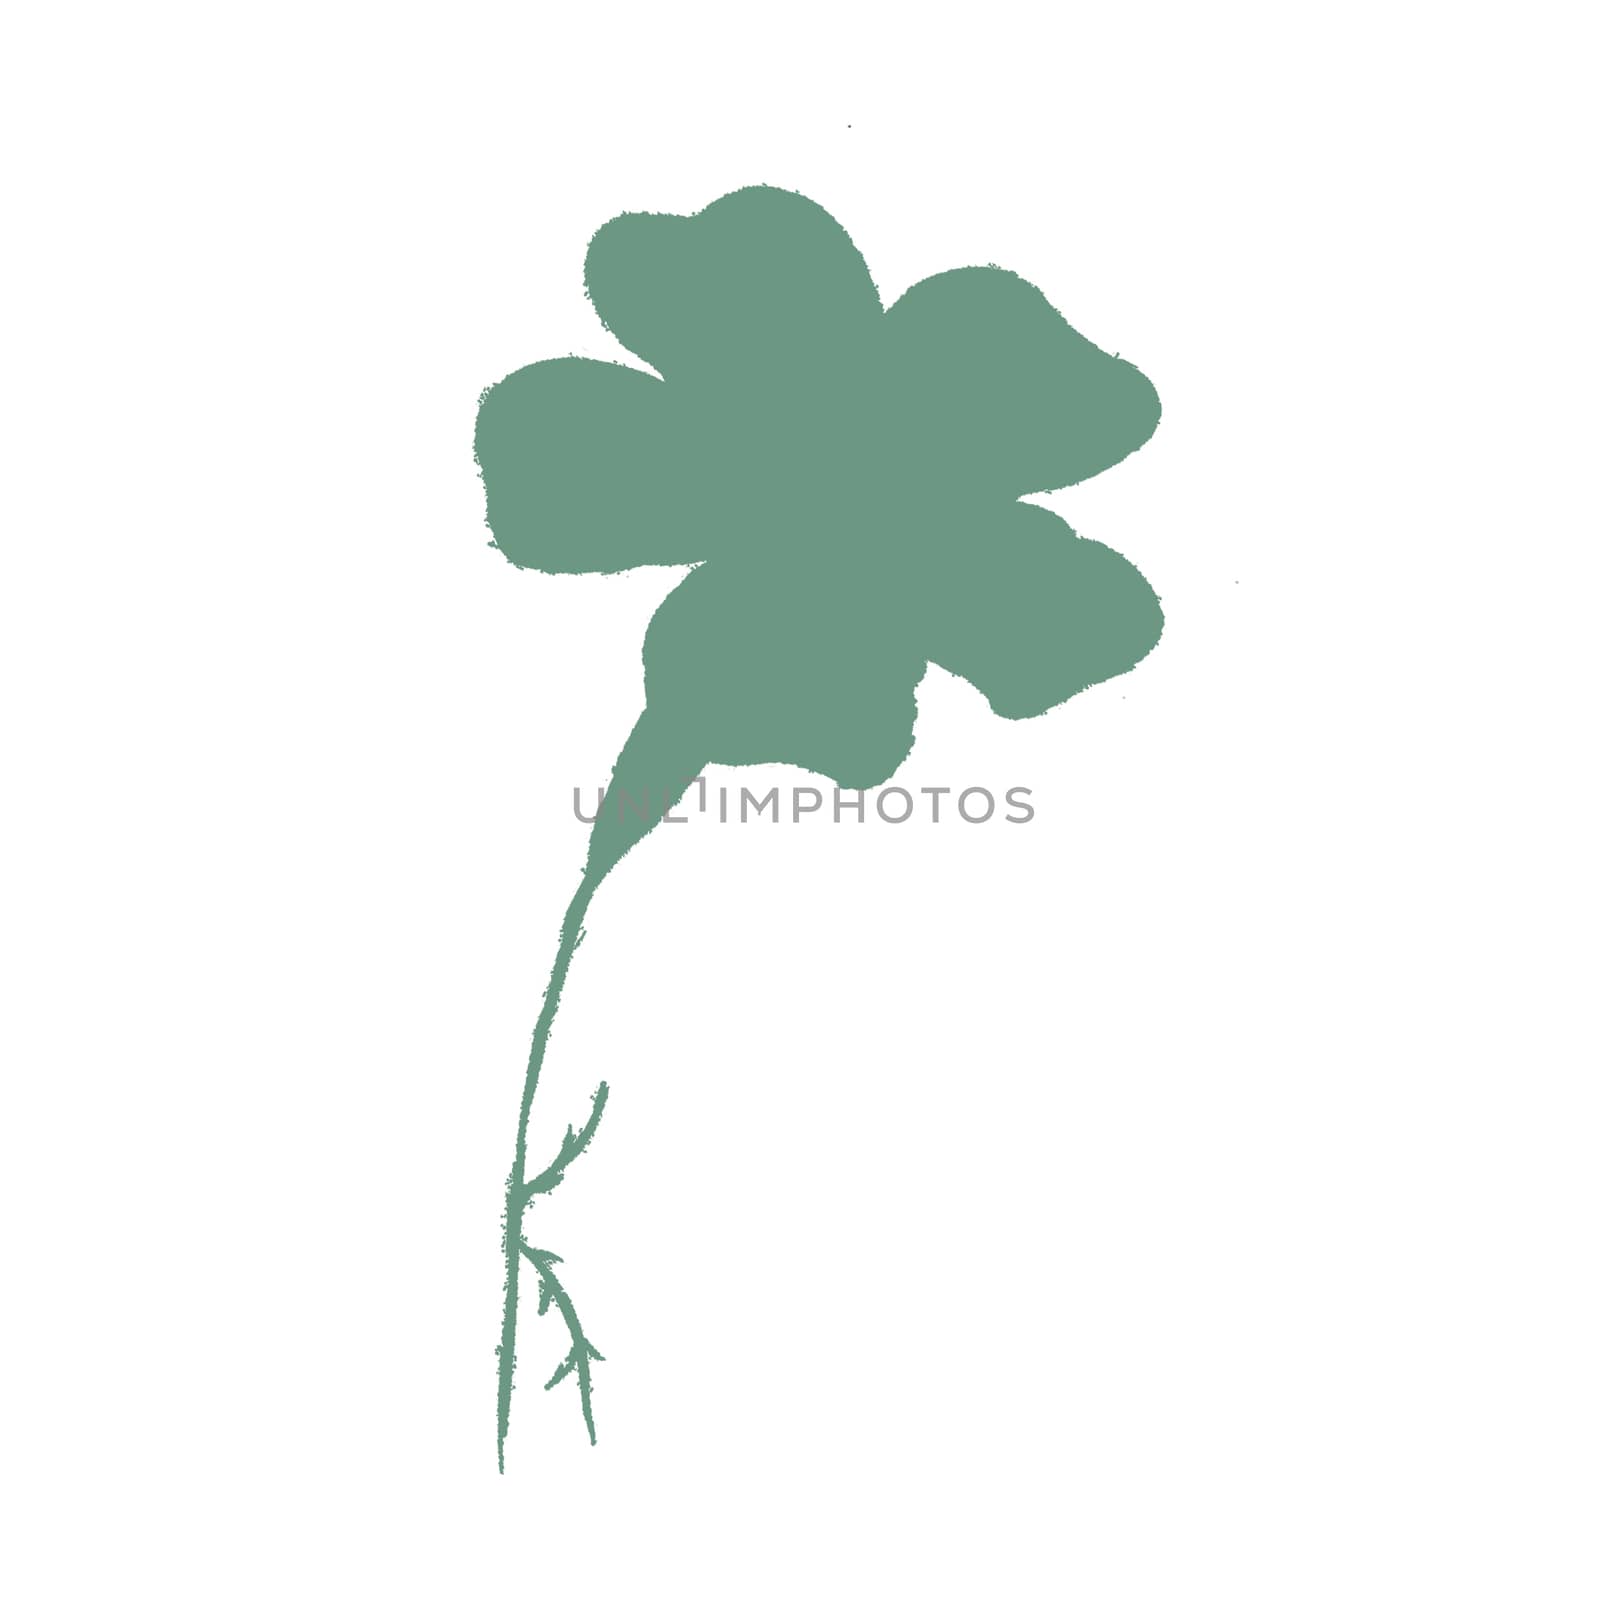 Green Hand-Drawn Isolated Flower Silhouette. Monochrome Botanical Plant Illustration in Sketch Style. Thin-leaved Marigolds for Print, Tattoo, Design, Holiday, Wedding and Birthday Card.